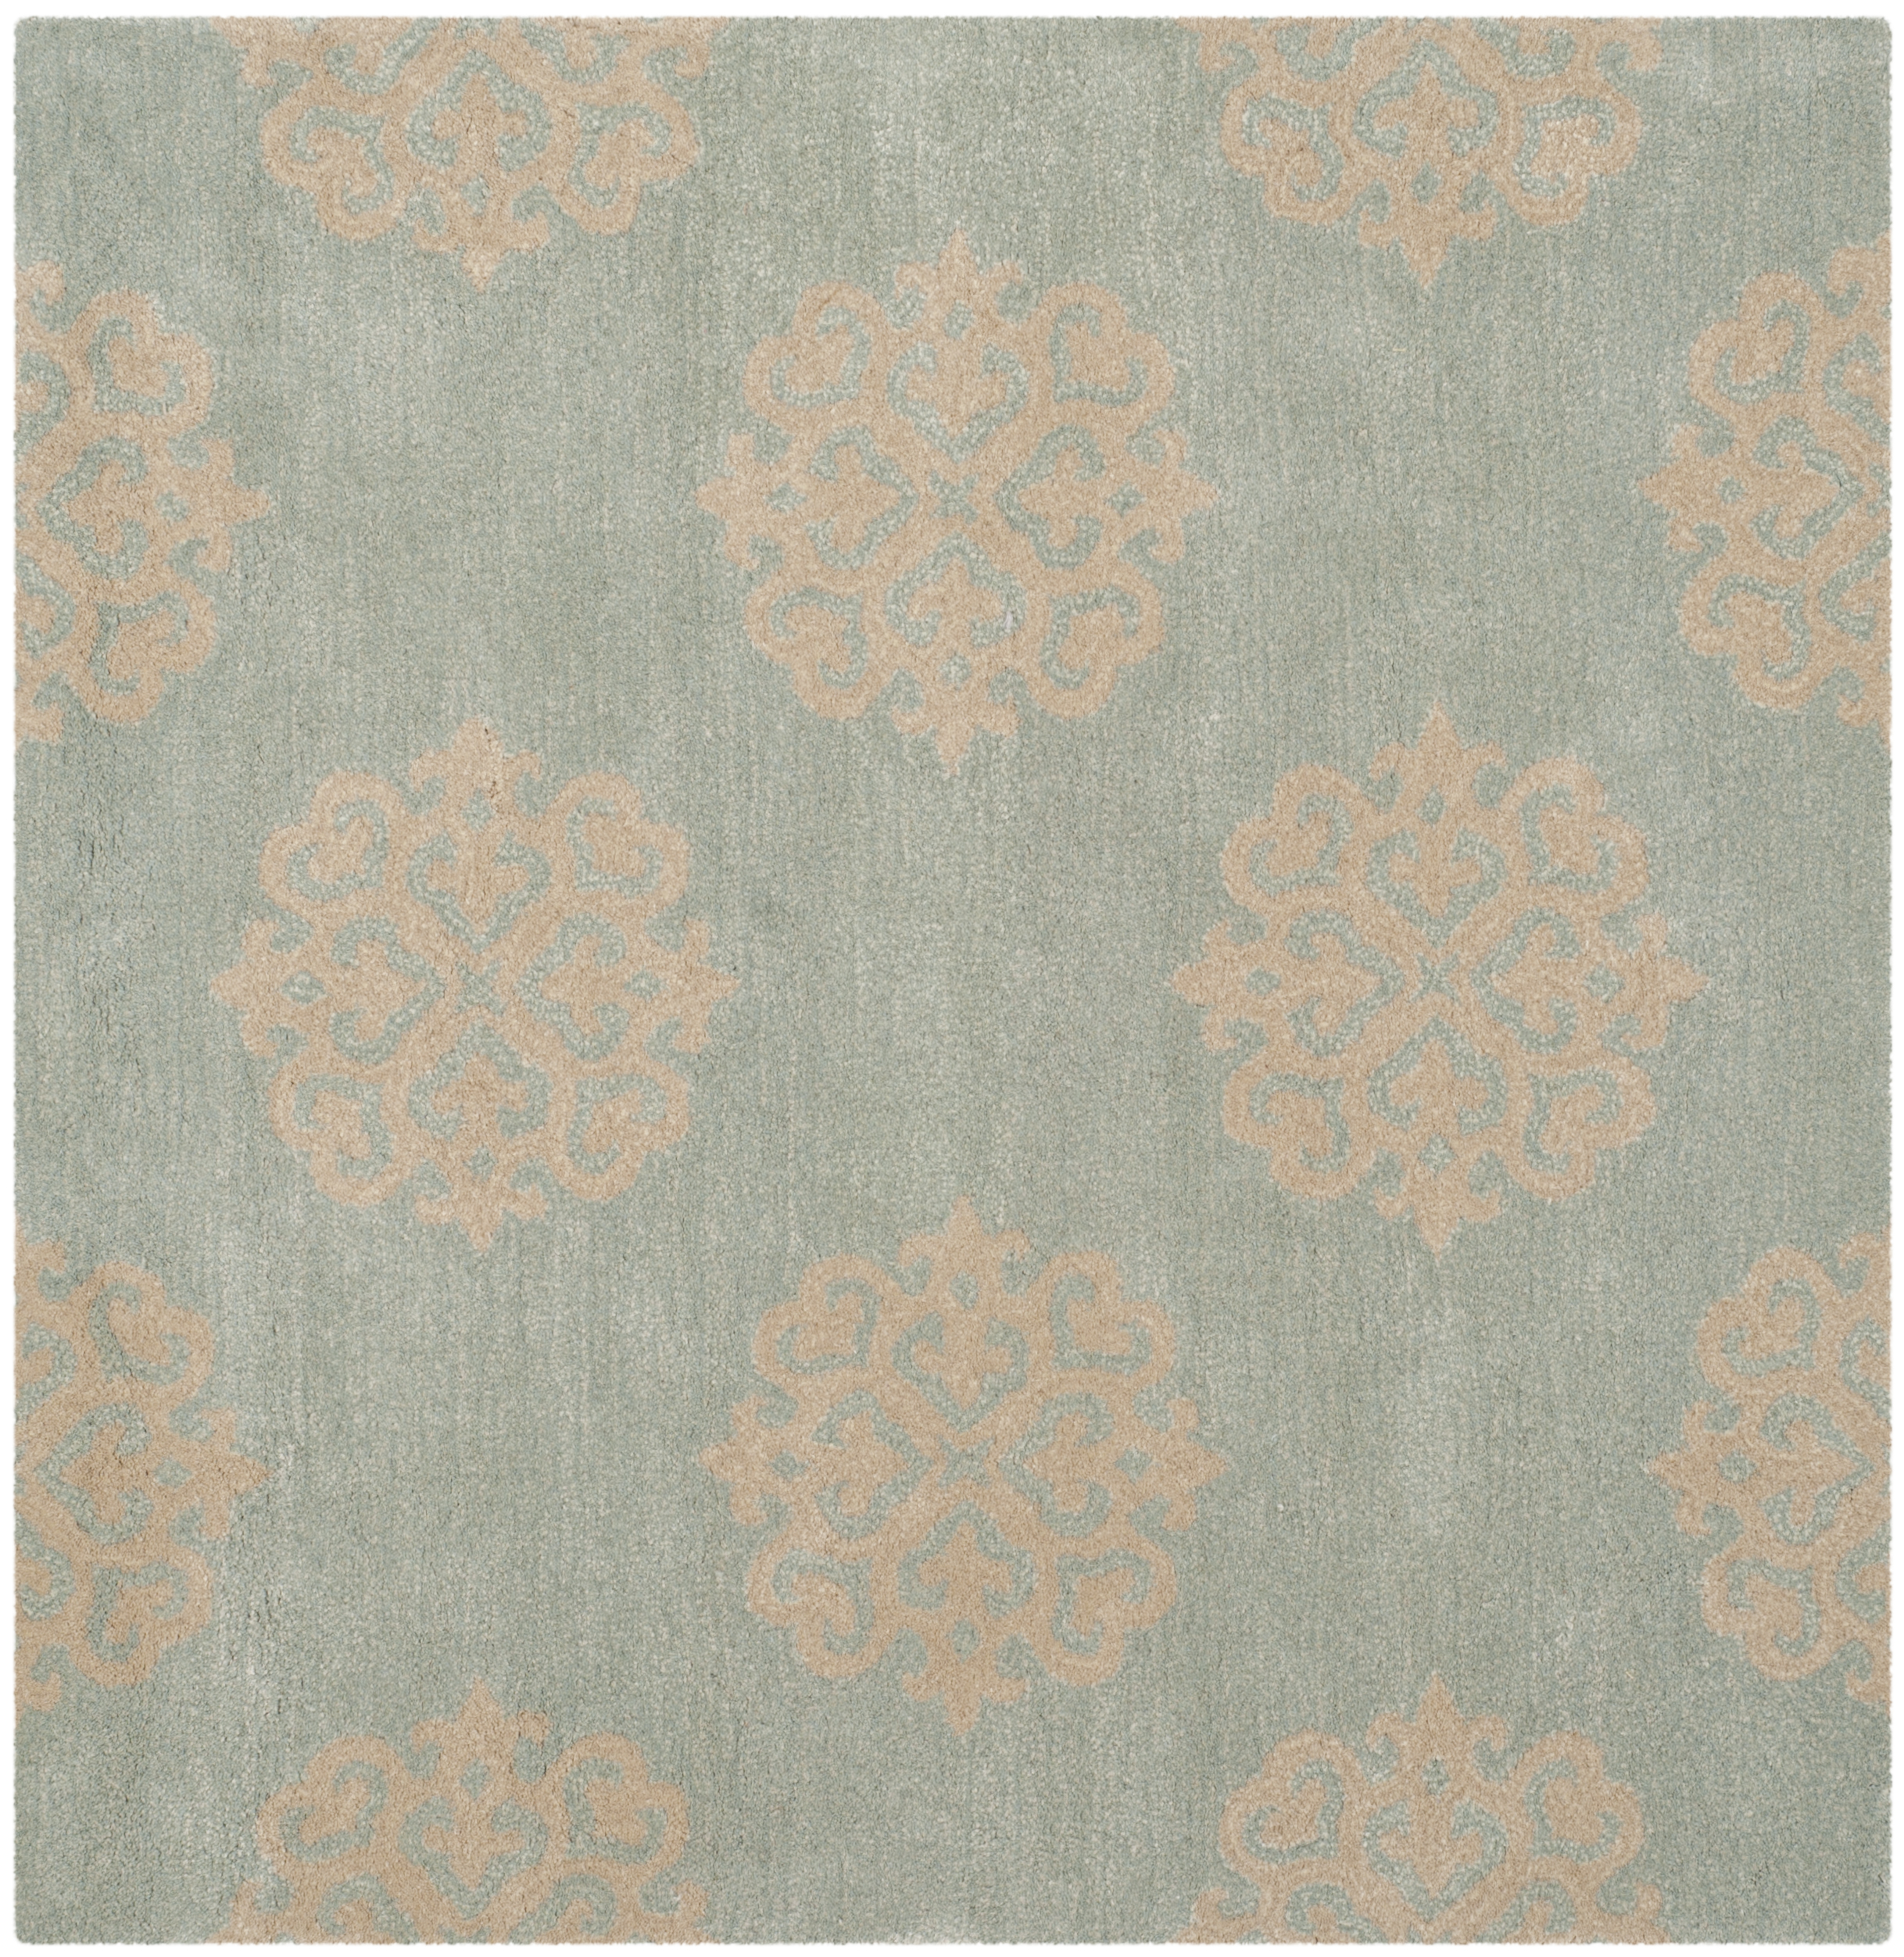 Yellow Wool Rug 2' 6 X 8' Runner SOH724A-28 for sale online Safavieh Soho Turquoise 